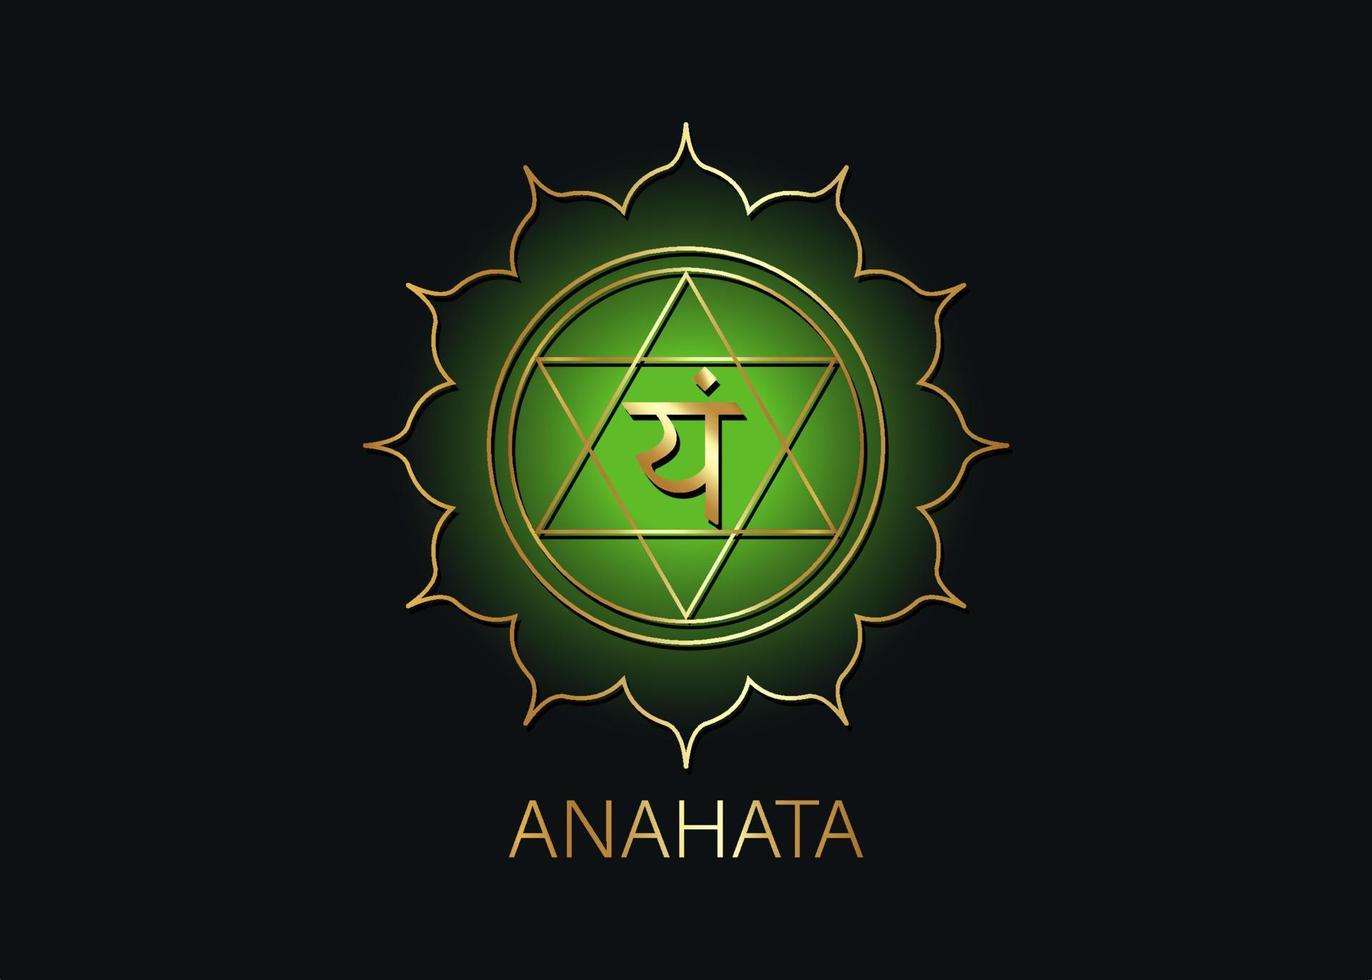 https://static.vecteezy.com/system/resources/previews/004/746/909/non_2x/anahata-fourth-chakra-with-the-hindu-sanskrit-seed-mantra-vam-green-is-a-flat-design-style-symbol-for-meditation-yoga-gold-logo-template-isolated-on-black-background-vector.jpg